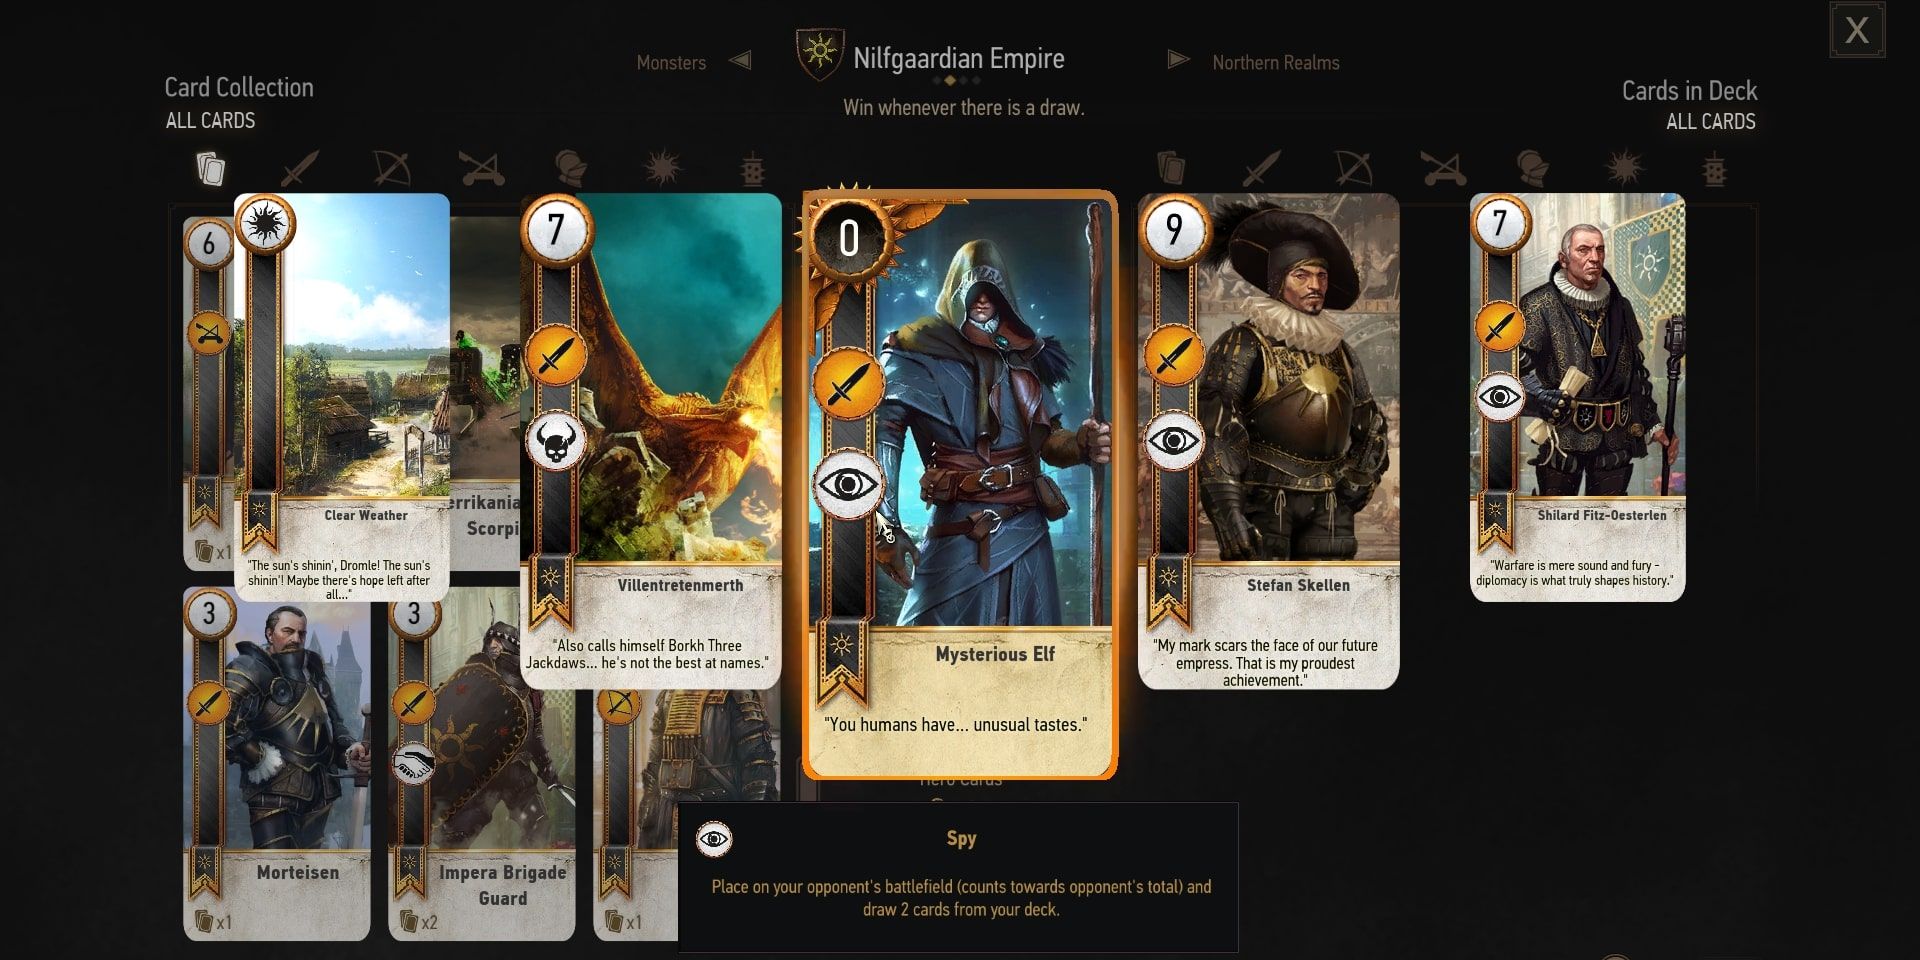 Mysterious Elf Gwent card in The Witcher 3